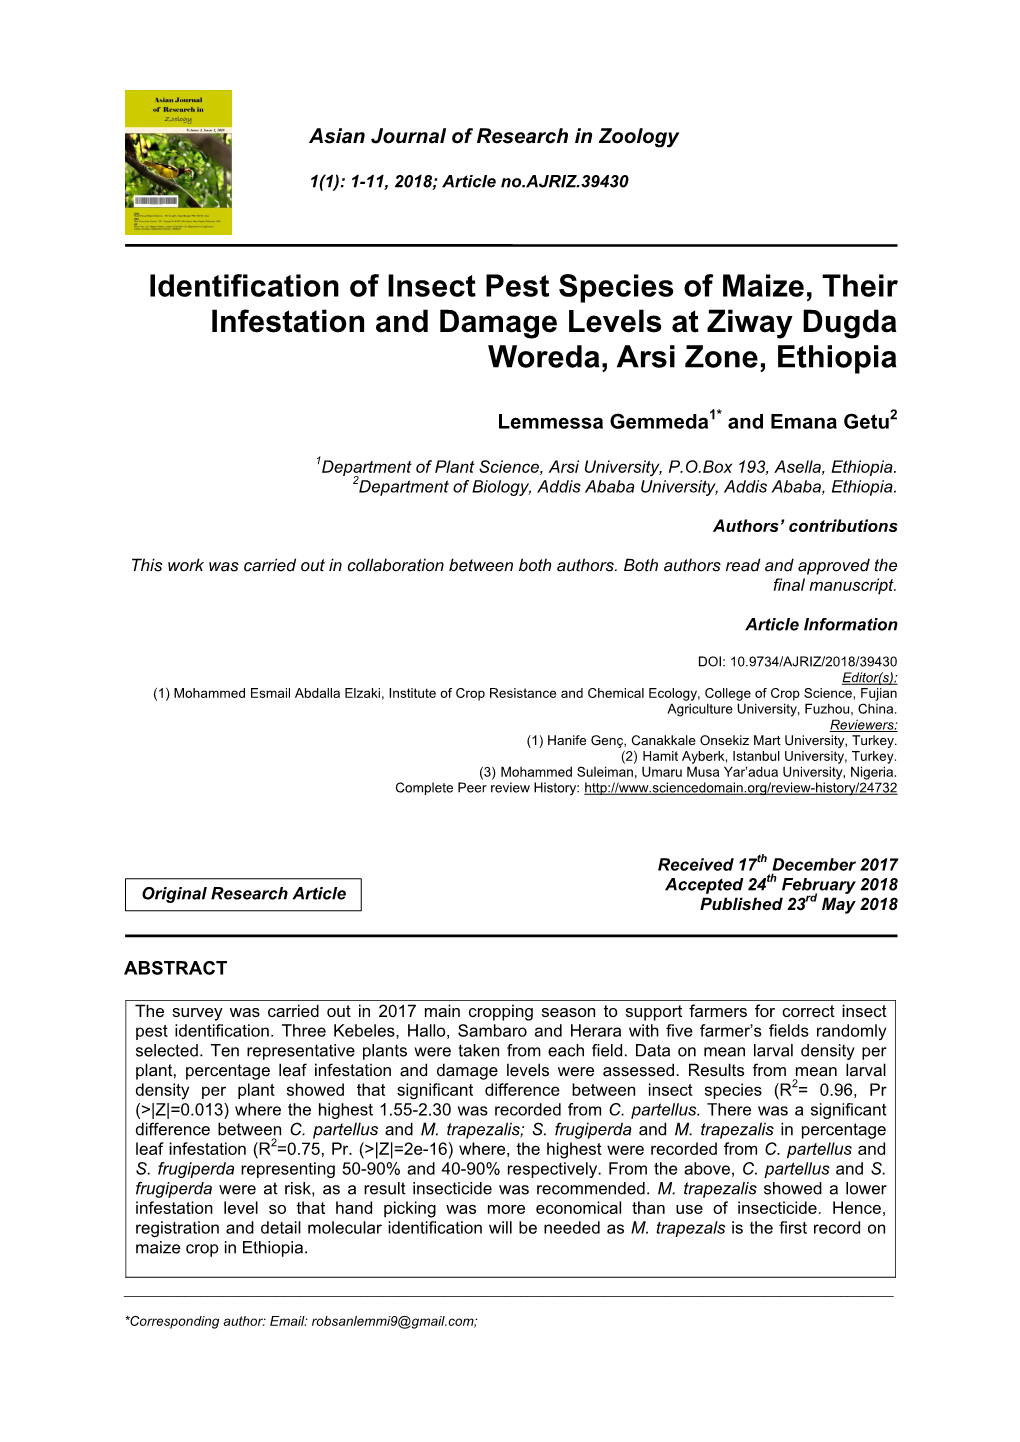 Identification of Insect Pest Species of Maize, Their Infestation and Damage Levels at Ziway Dugda Woreda, Arsi Zone, Ethiopia